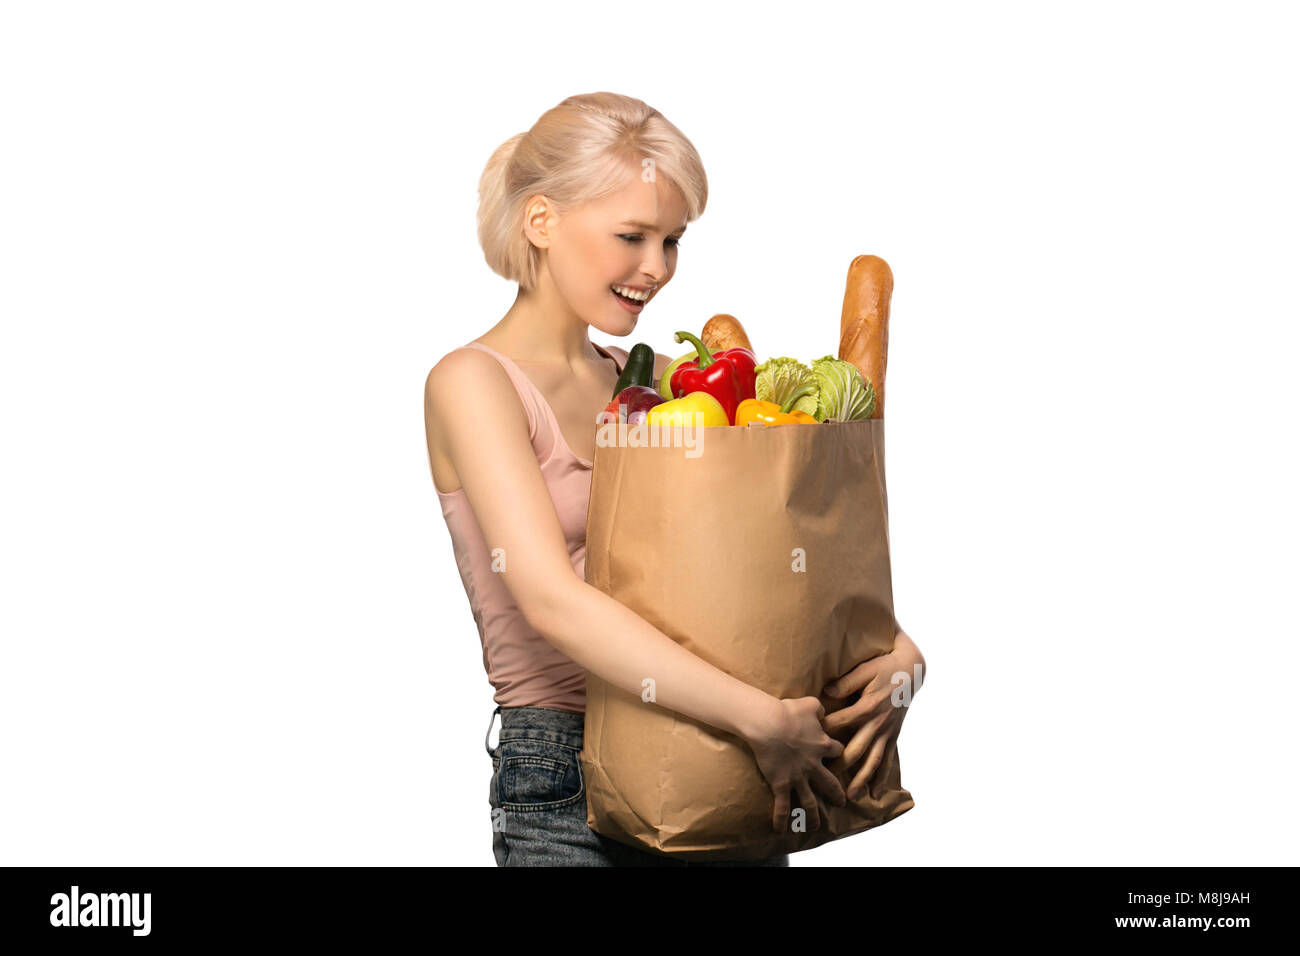 Portrait of happy smiling woman with groceries shopping bag full of vegetables isolated on white background Stock Photo